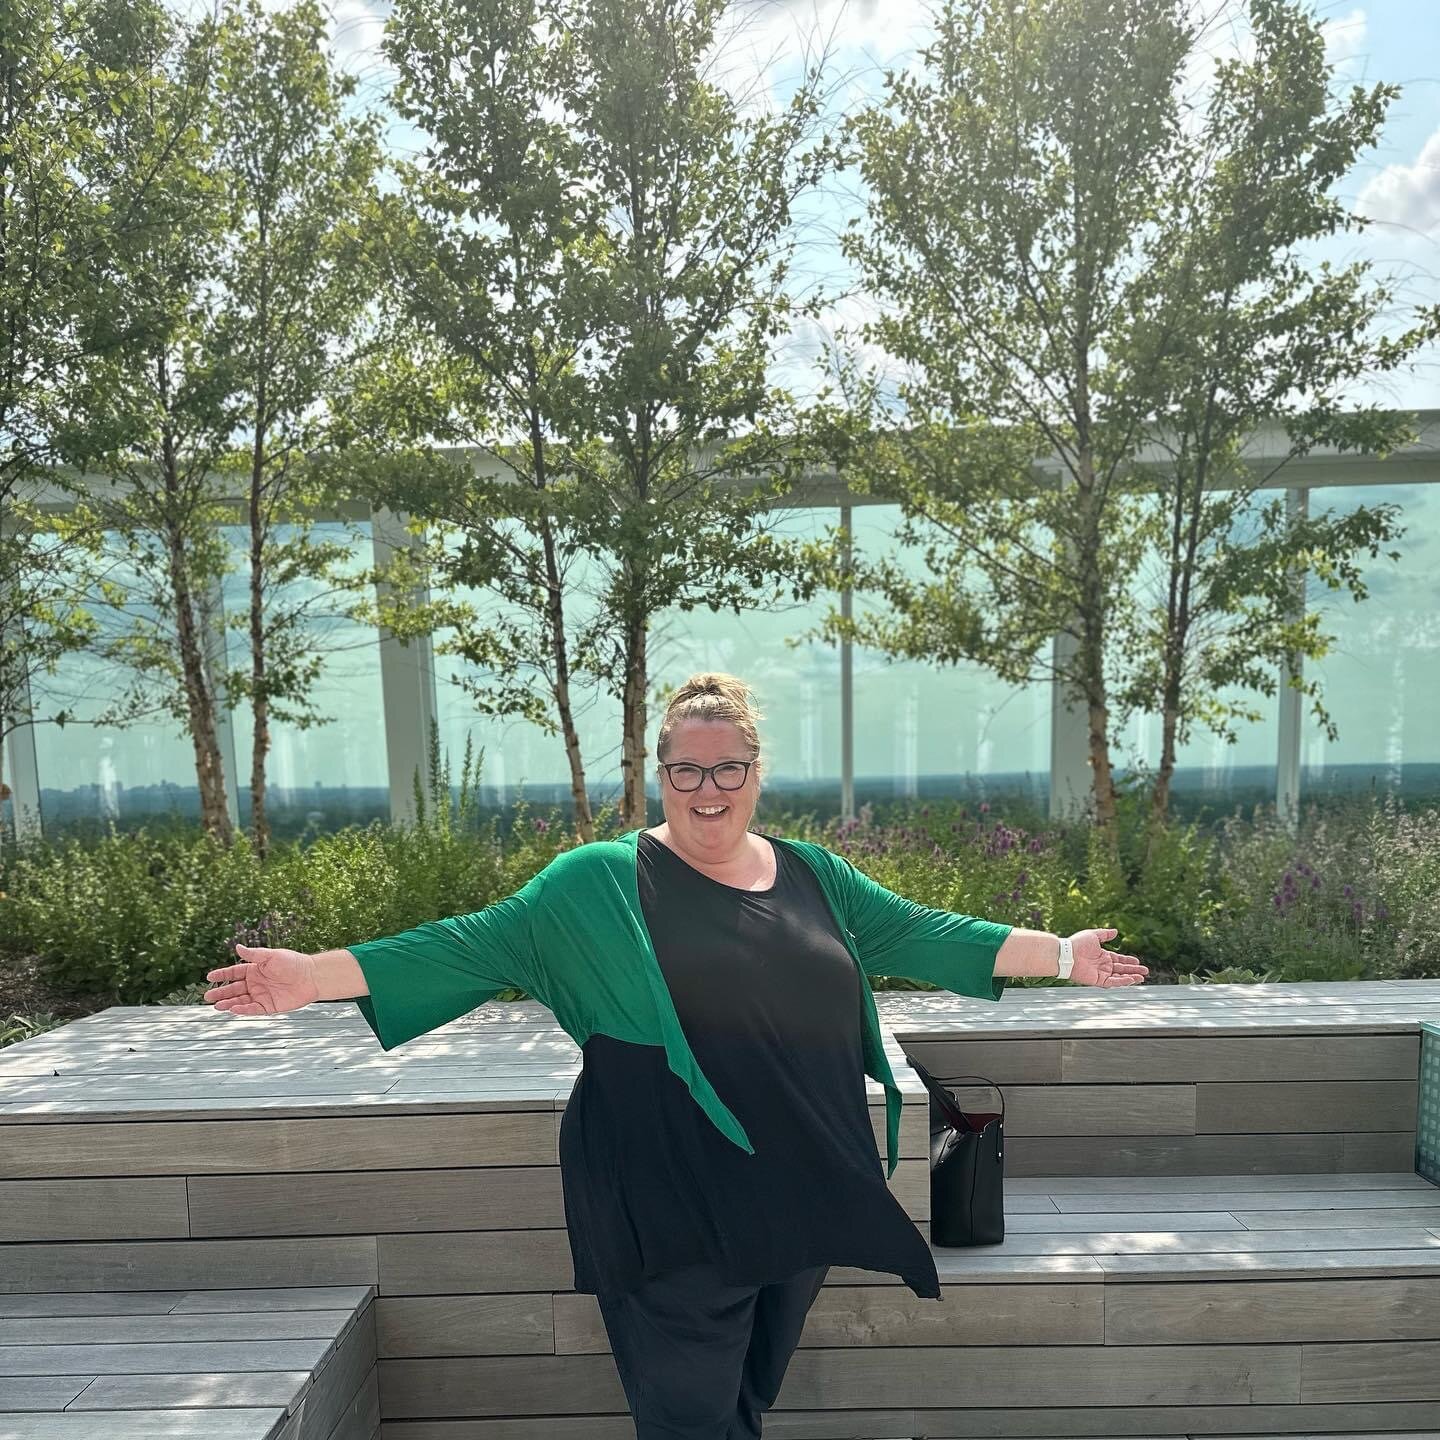 Jenna Dosch, Creative Services Manager, recently had the opportunity to visit Marriott International Headquarters in Bethesda, Maryland where she met with Marriott DAM Digital Asset Systems Manager, Susan Pleiman. 

&ldquo;We had a chance to discuss,